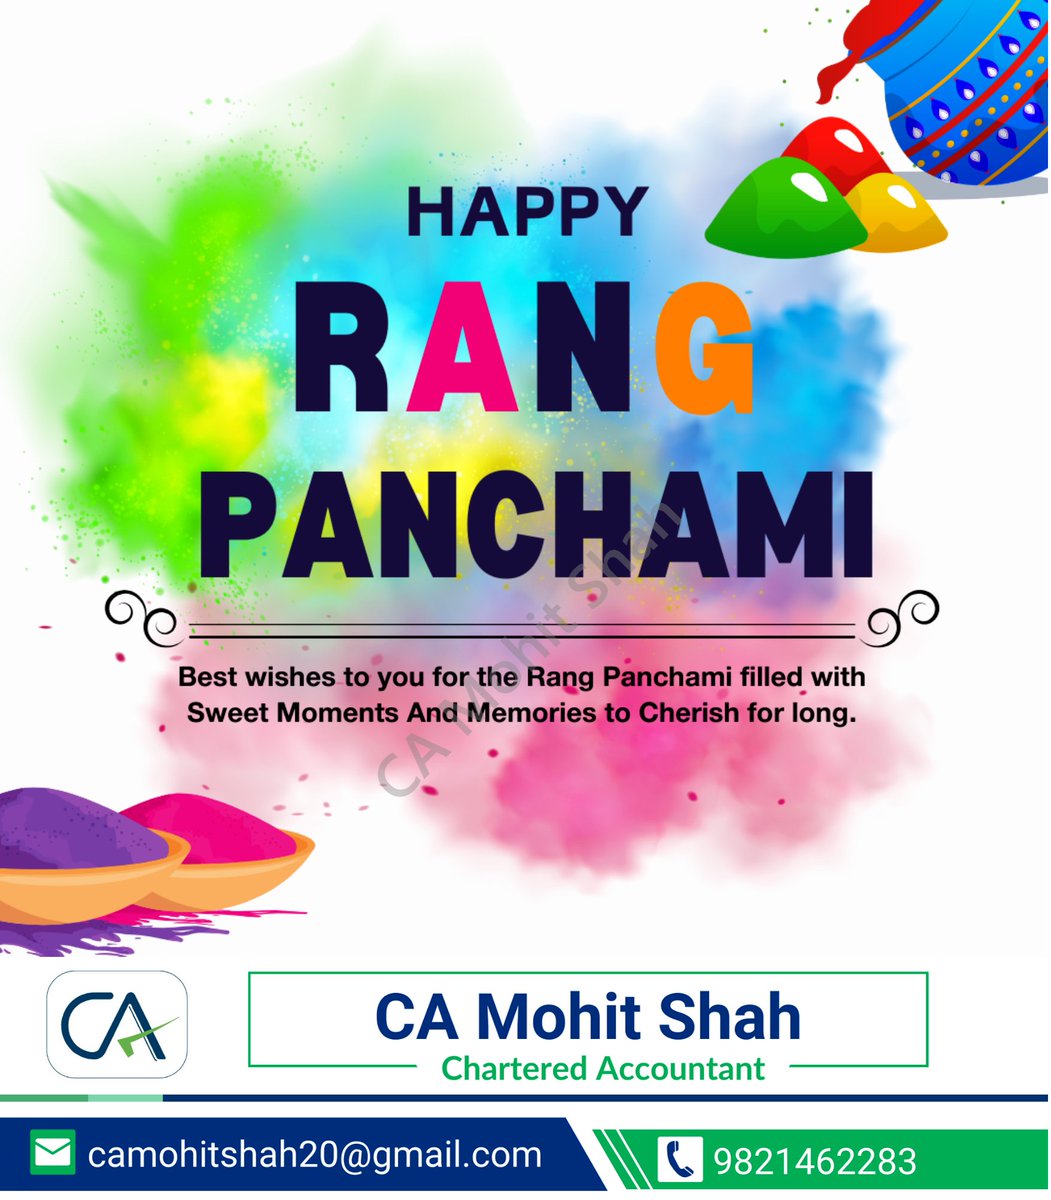 Celebrating the festival of colors, Ranga Panchami! Let's spread joy and happiness with colors.  

#RangaPanchami #HoliFestival #FestivalOfColors #SpringFestival #HinduFestivals #CulturalHeritage #Traditions #FestiveSpirit #ColorfulCelebration #JoyAndHappiness